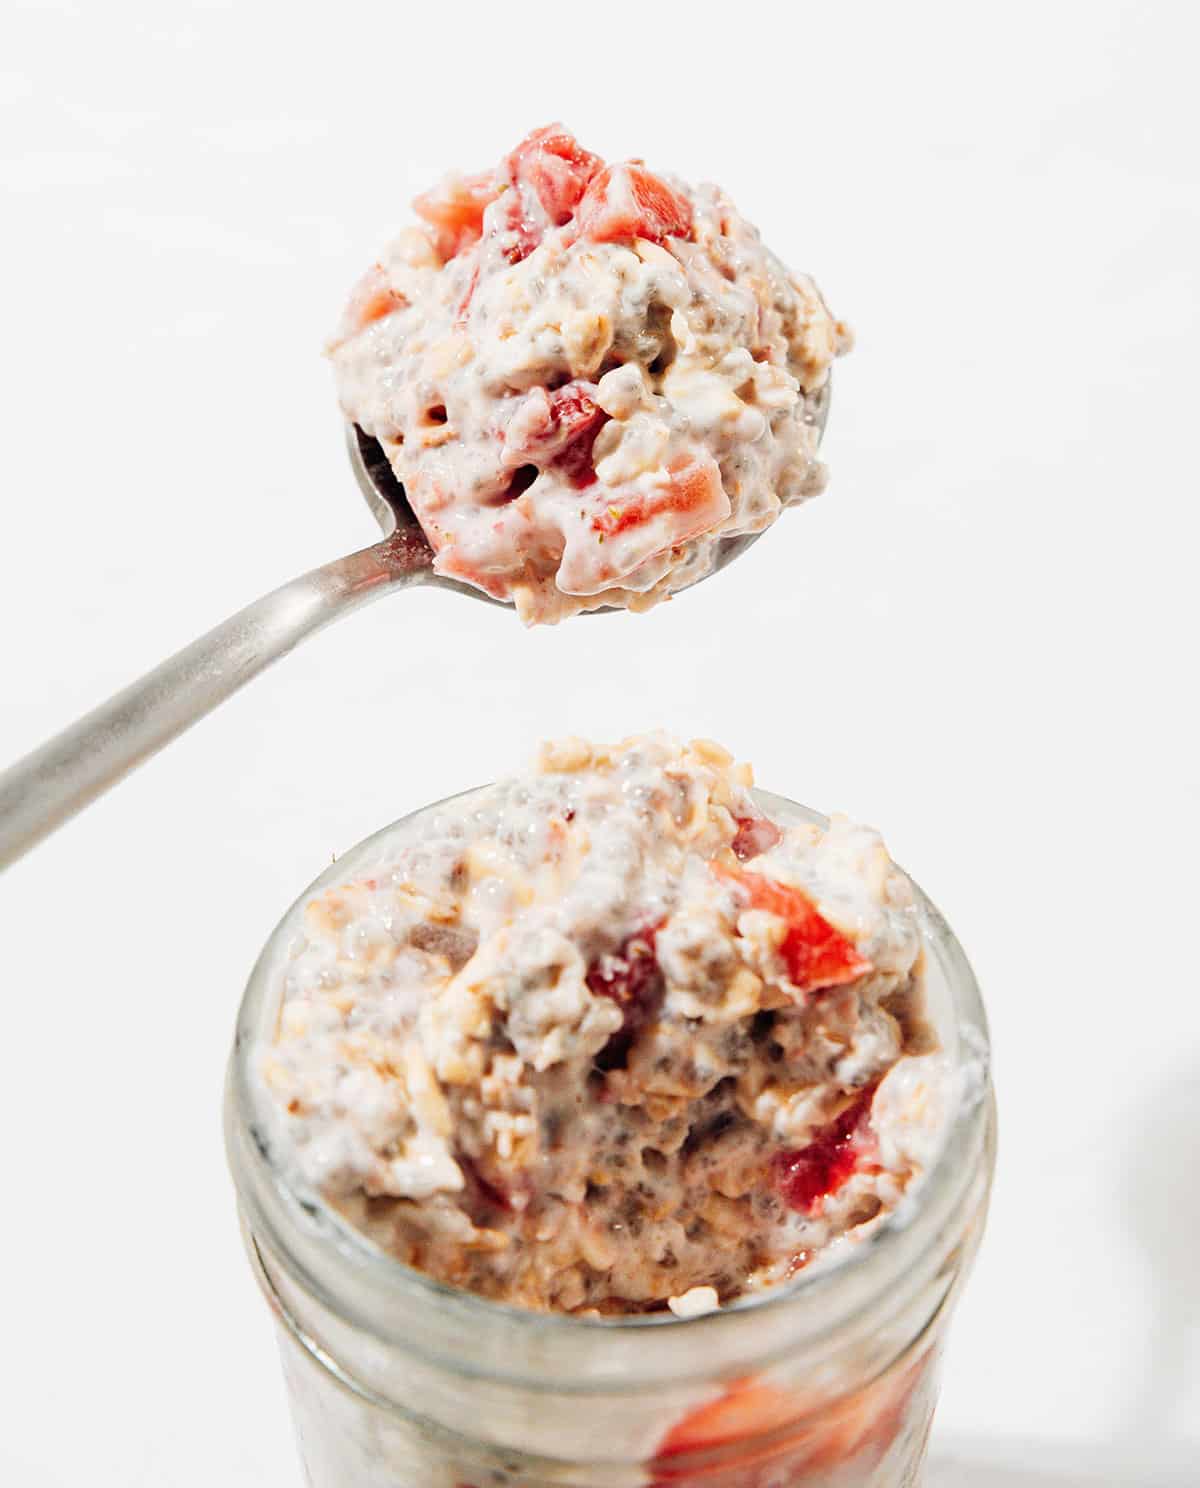 Spoon of strawberry overnight oats.